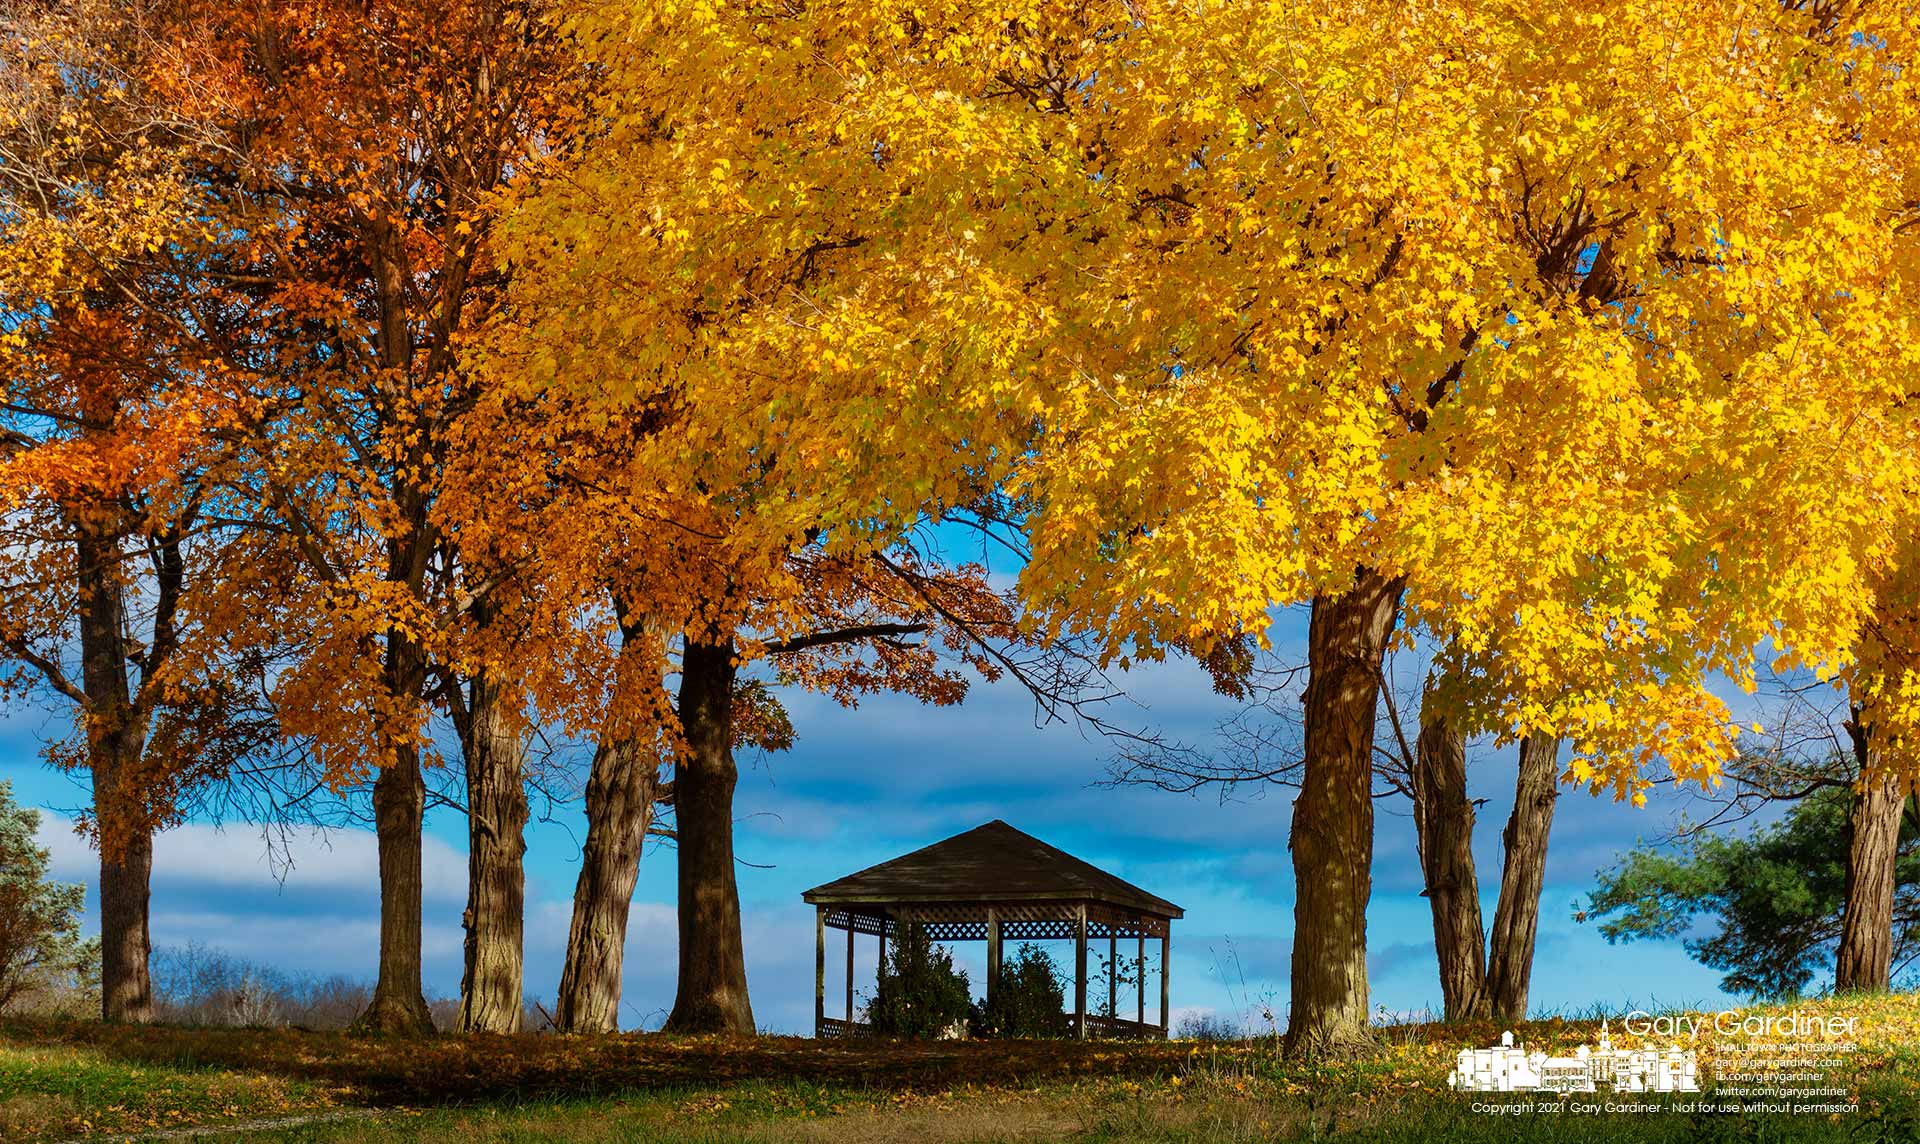 The abandoned gazebo on the Sharp Farm on Africa Road sits in the shade of maple trees bright with the colors of fall. My Final Photo for Nov. 19, 2021.